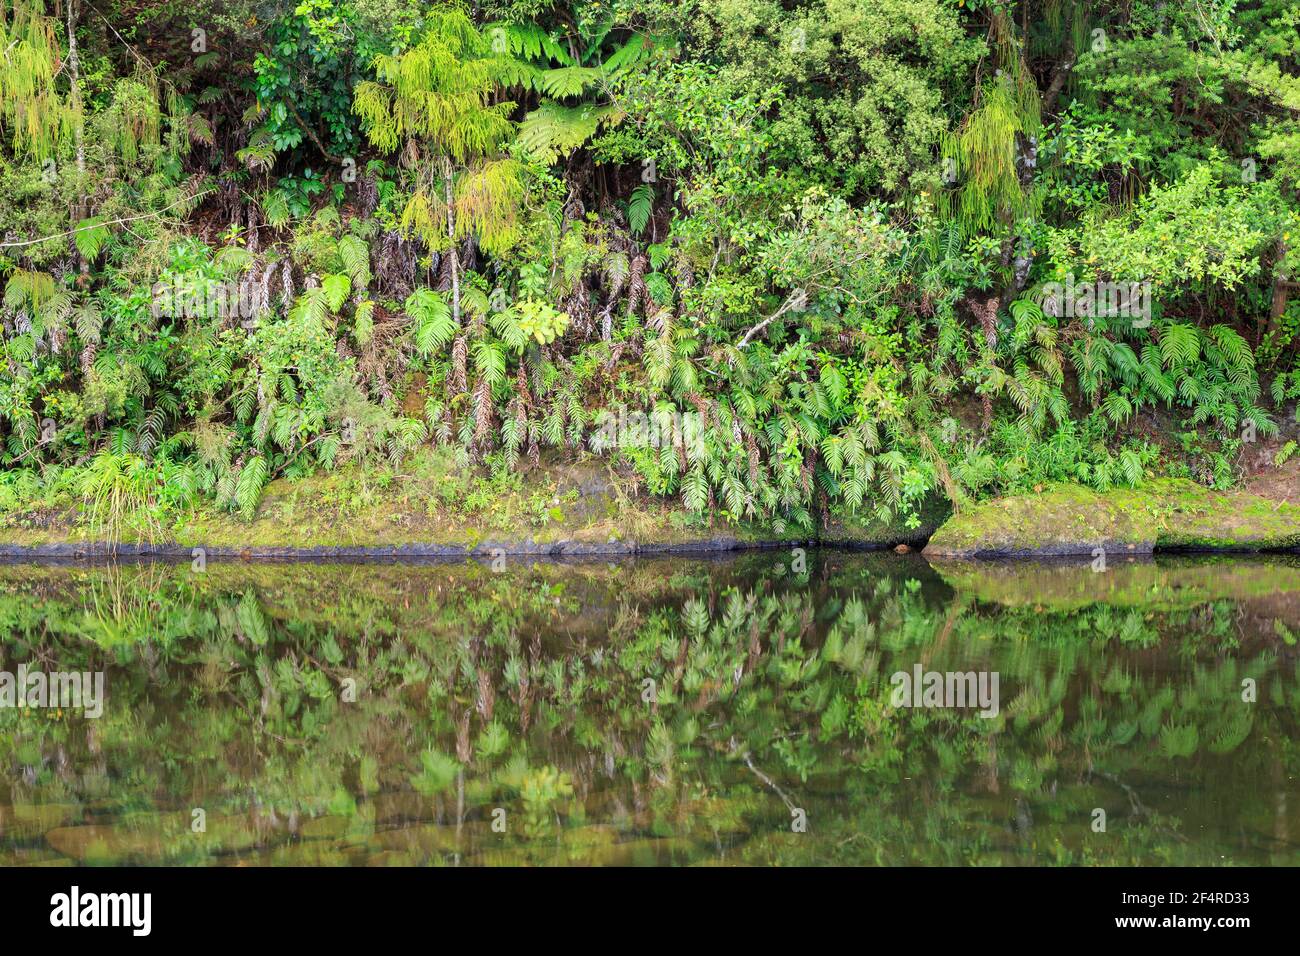 A steep riverbank in New Zealand native forest. Ferns and other plants growing on it are reflected in the quiet water below Stock Photo